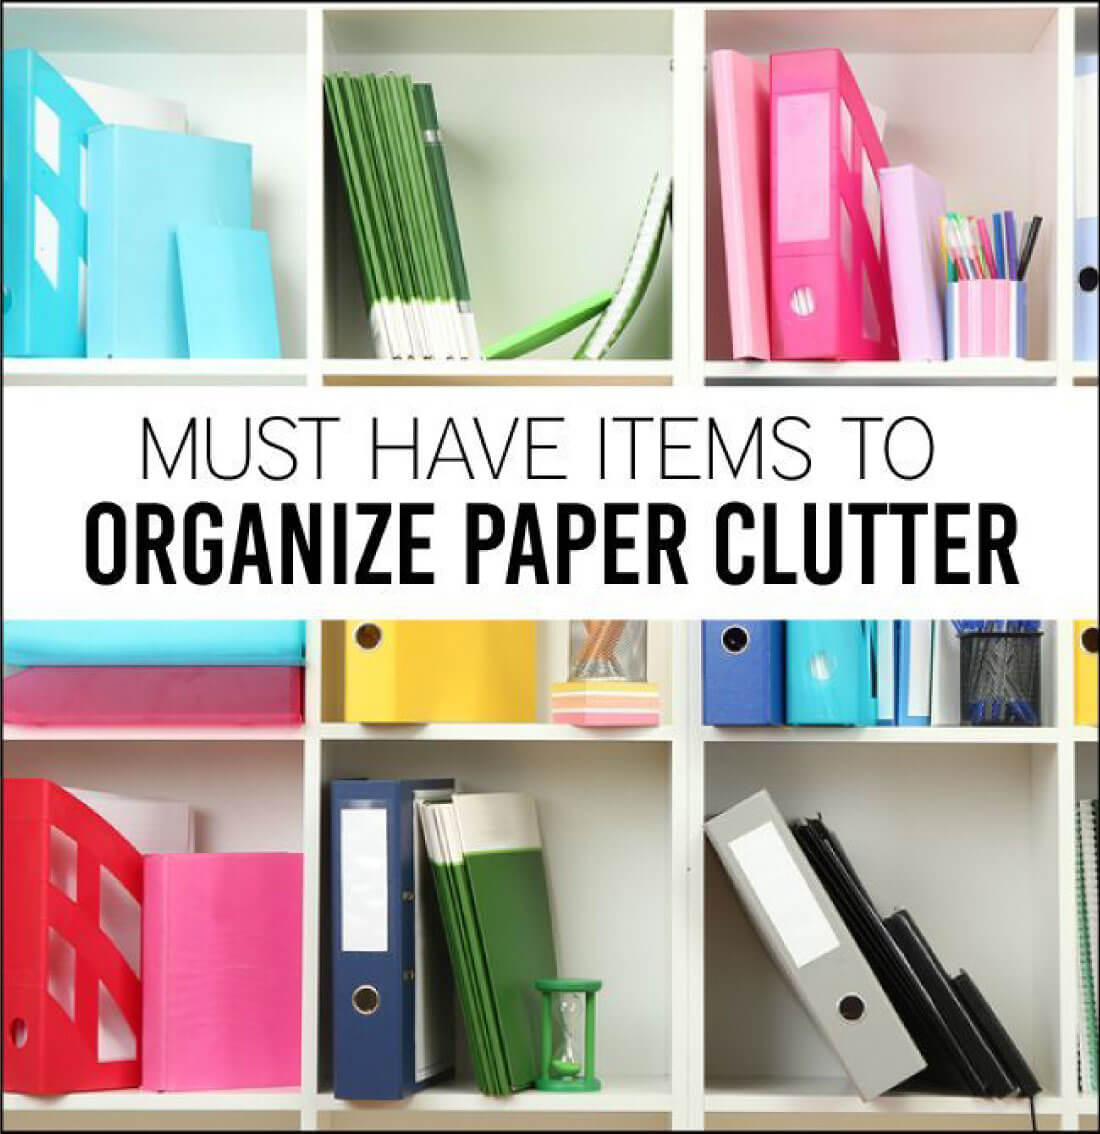 Must Have Items to Organize Paper Clutter - simple things you can do to clear the clutter. 